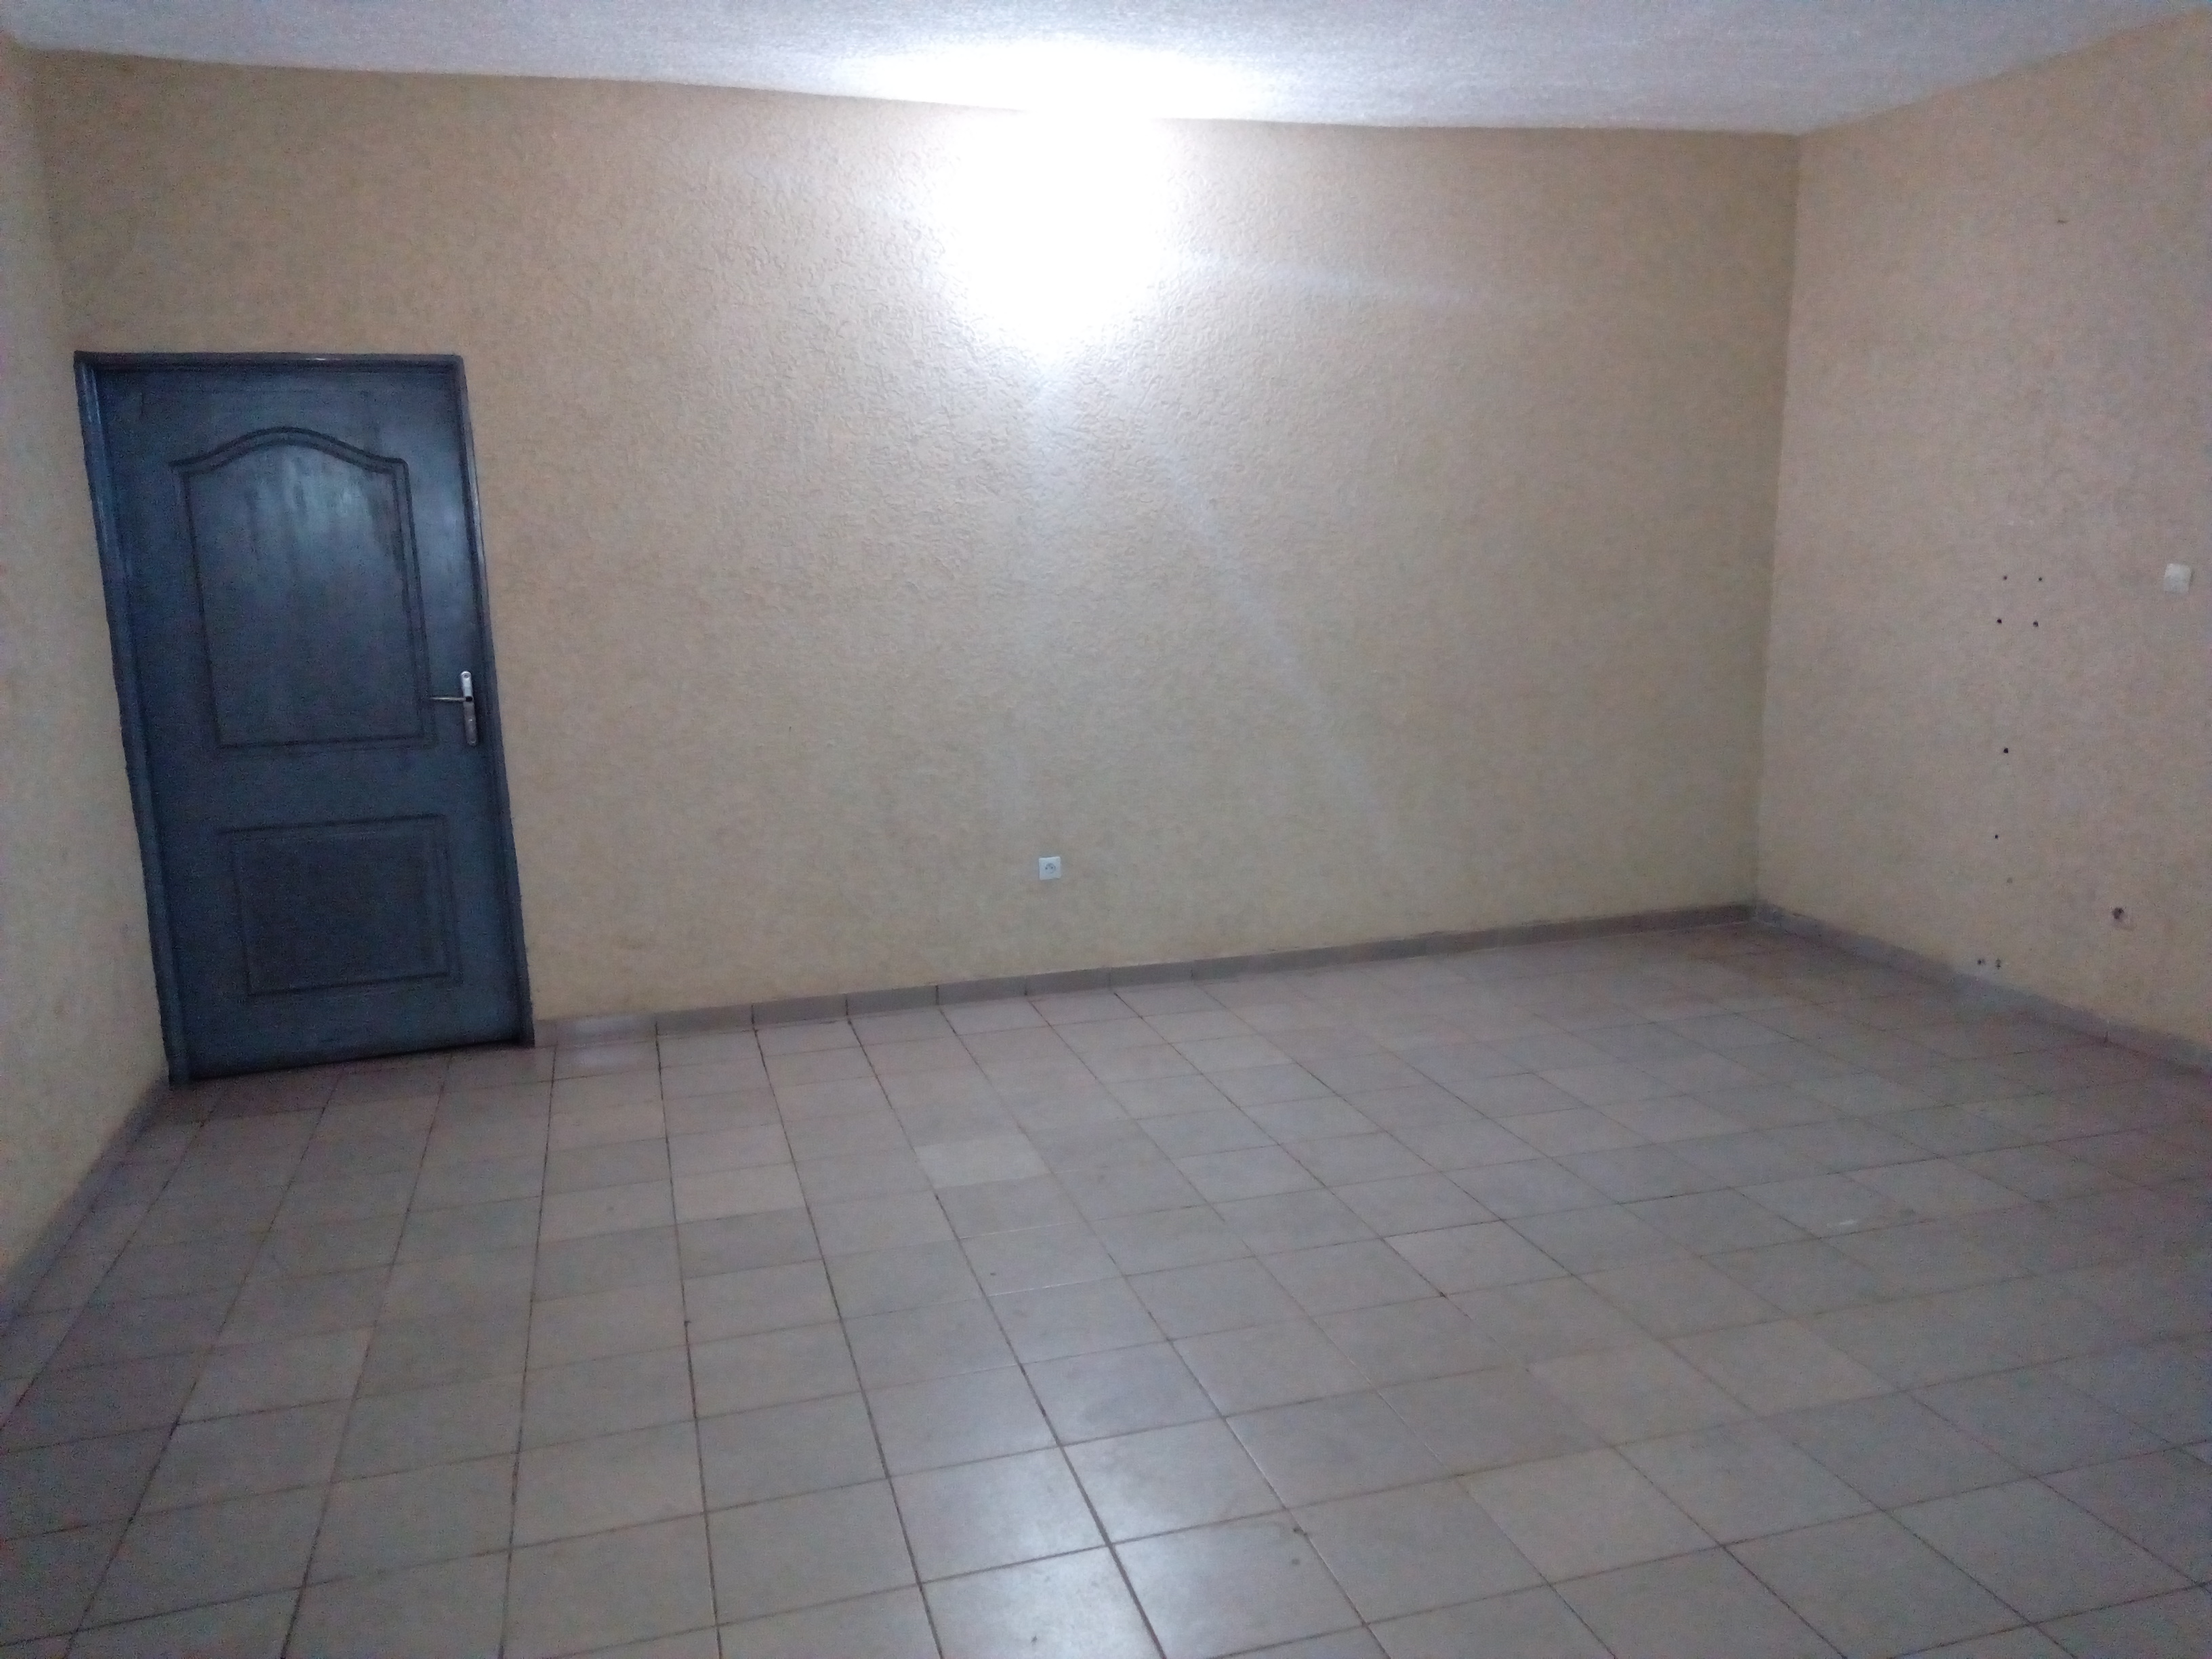 N° 4113 :
                        Appartement à louer , Avedji, Lome, Togo : 120 000 XOF/mois